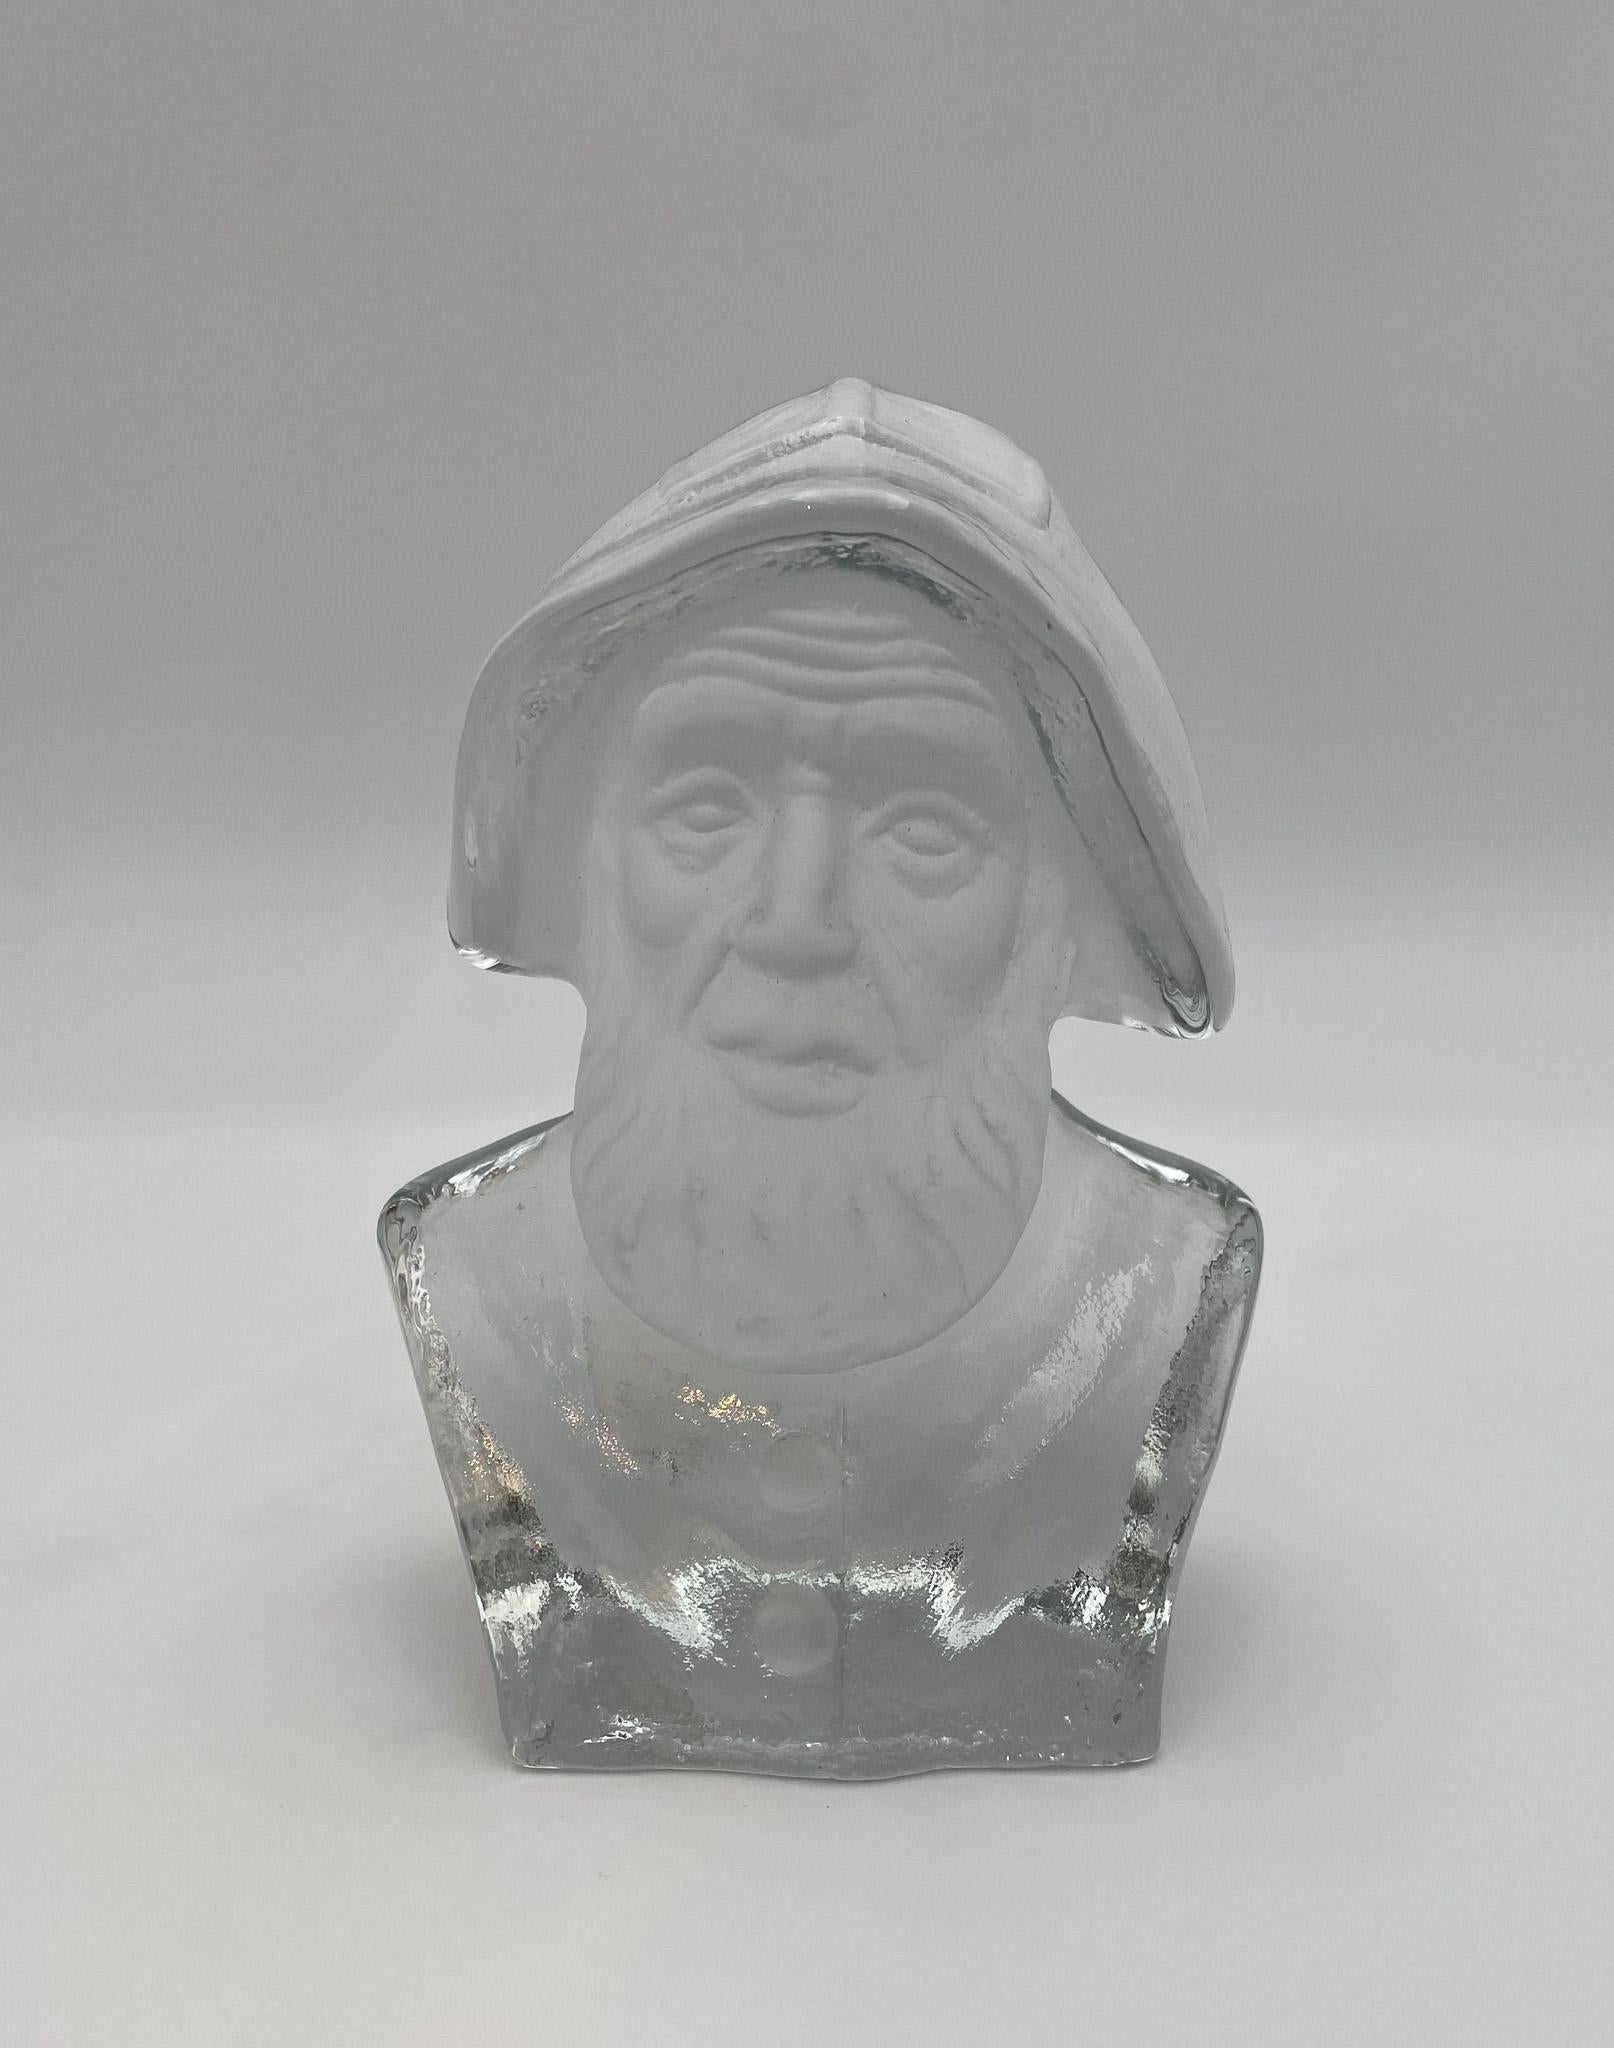 Viking Glass Fisherman Bust Sculpture, Paperweight or Bookend,  United States, 20th Century.  Retains the original Viking Glass label to the back.  